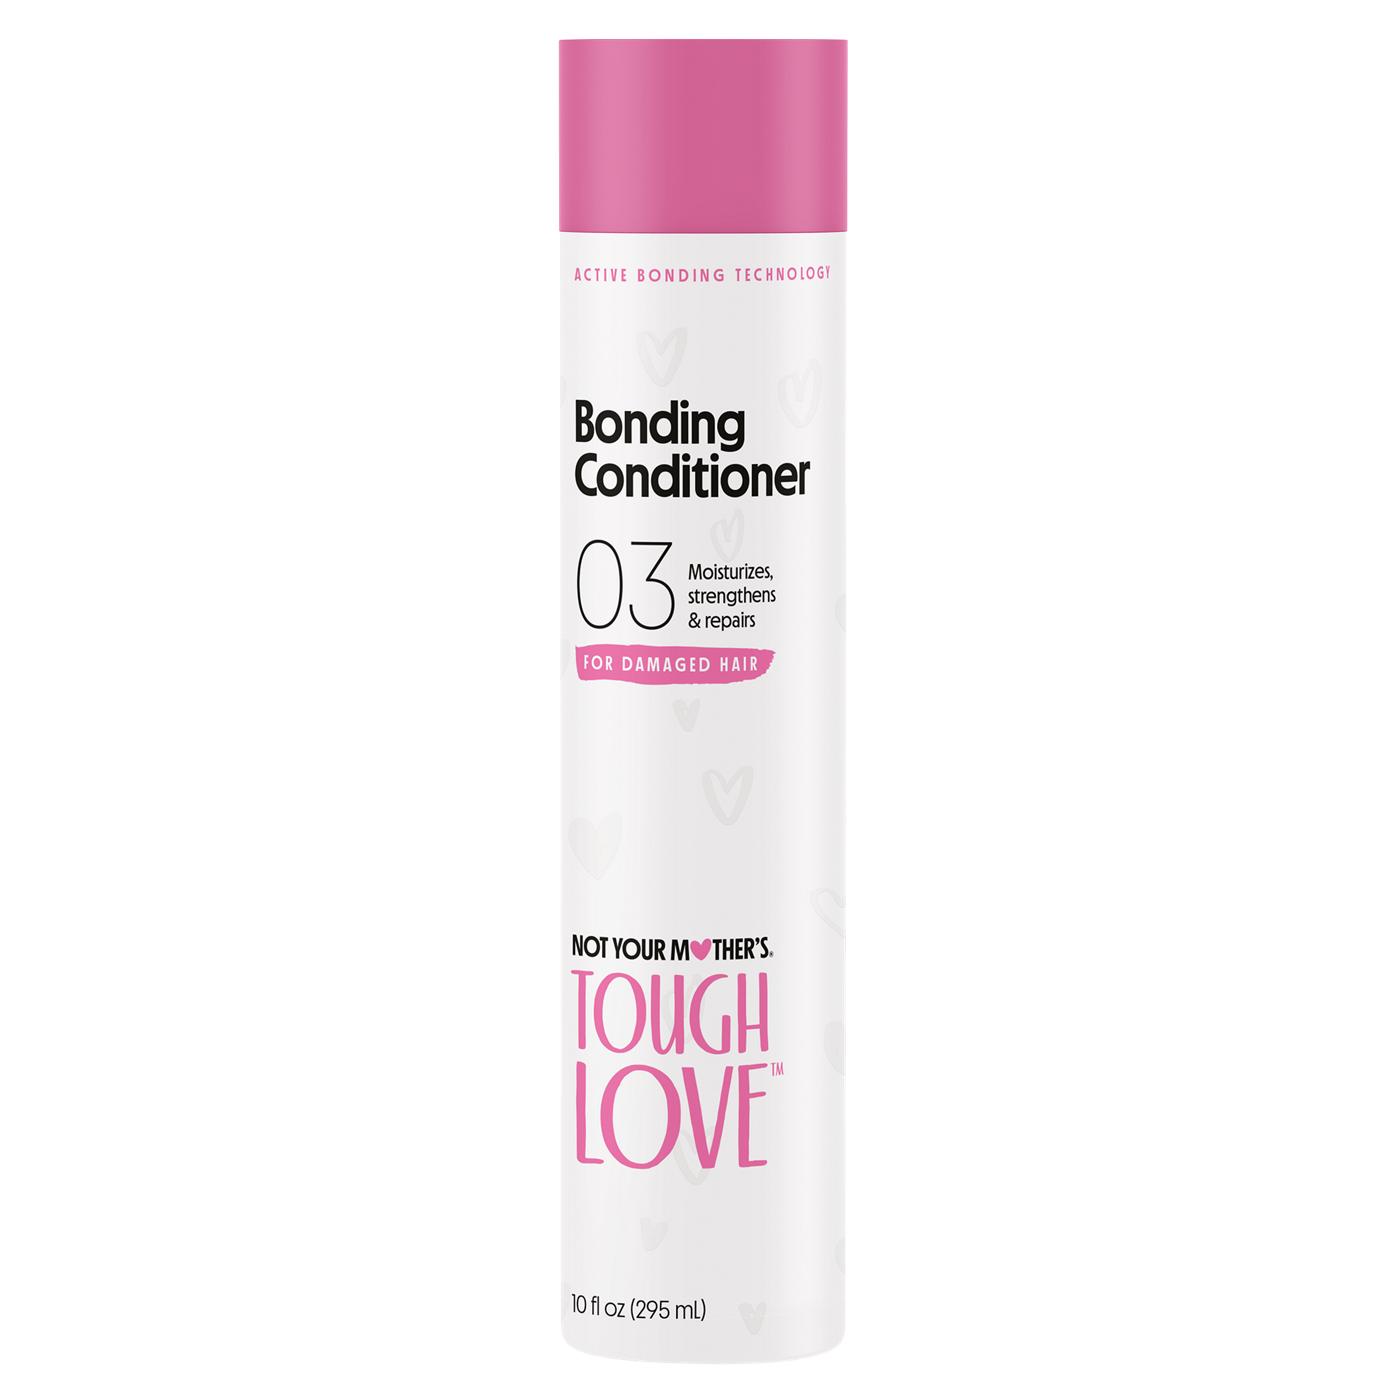 Not Your Mother's Tough Love Bonding Conditioner; image 1 of 2